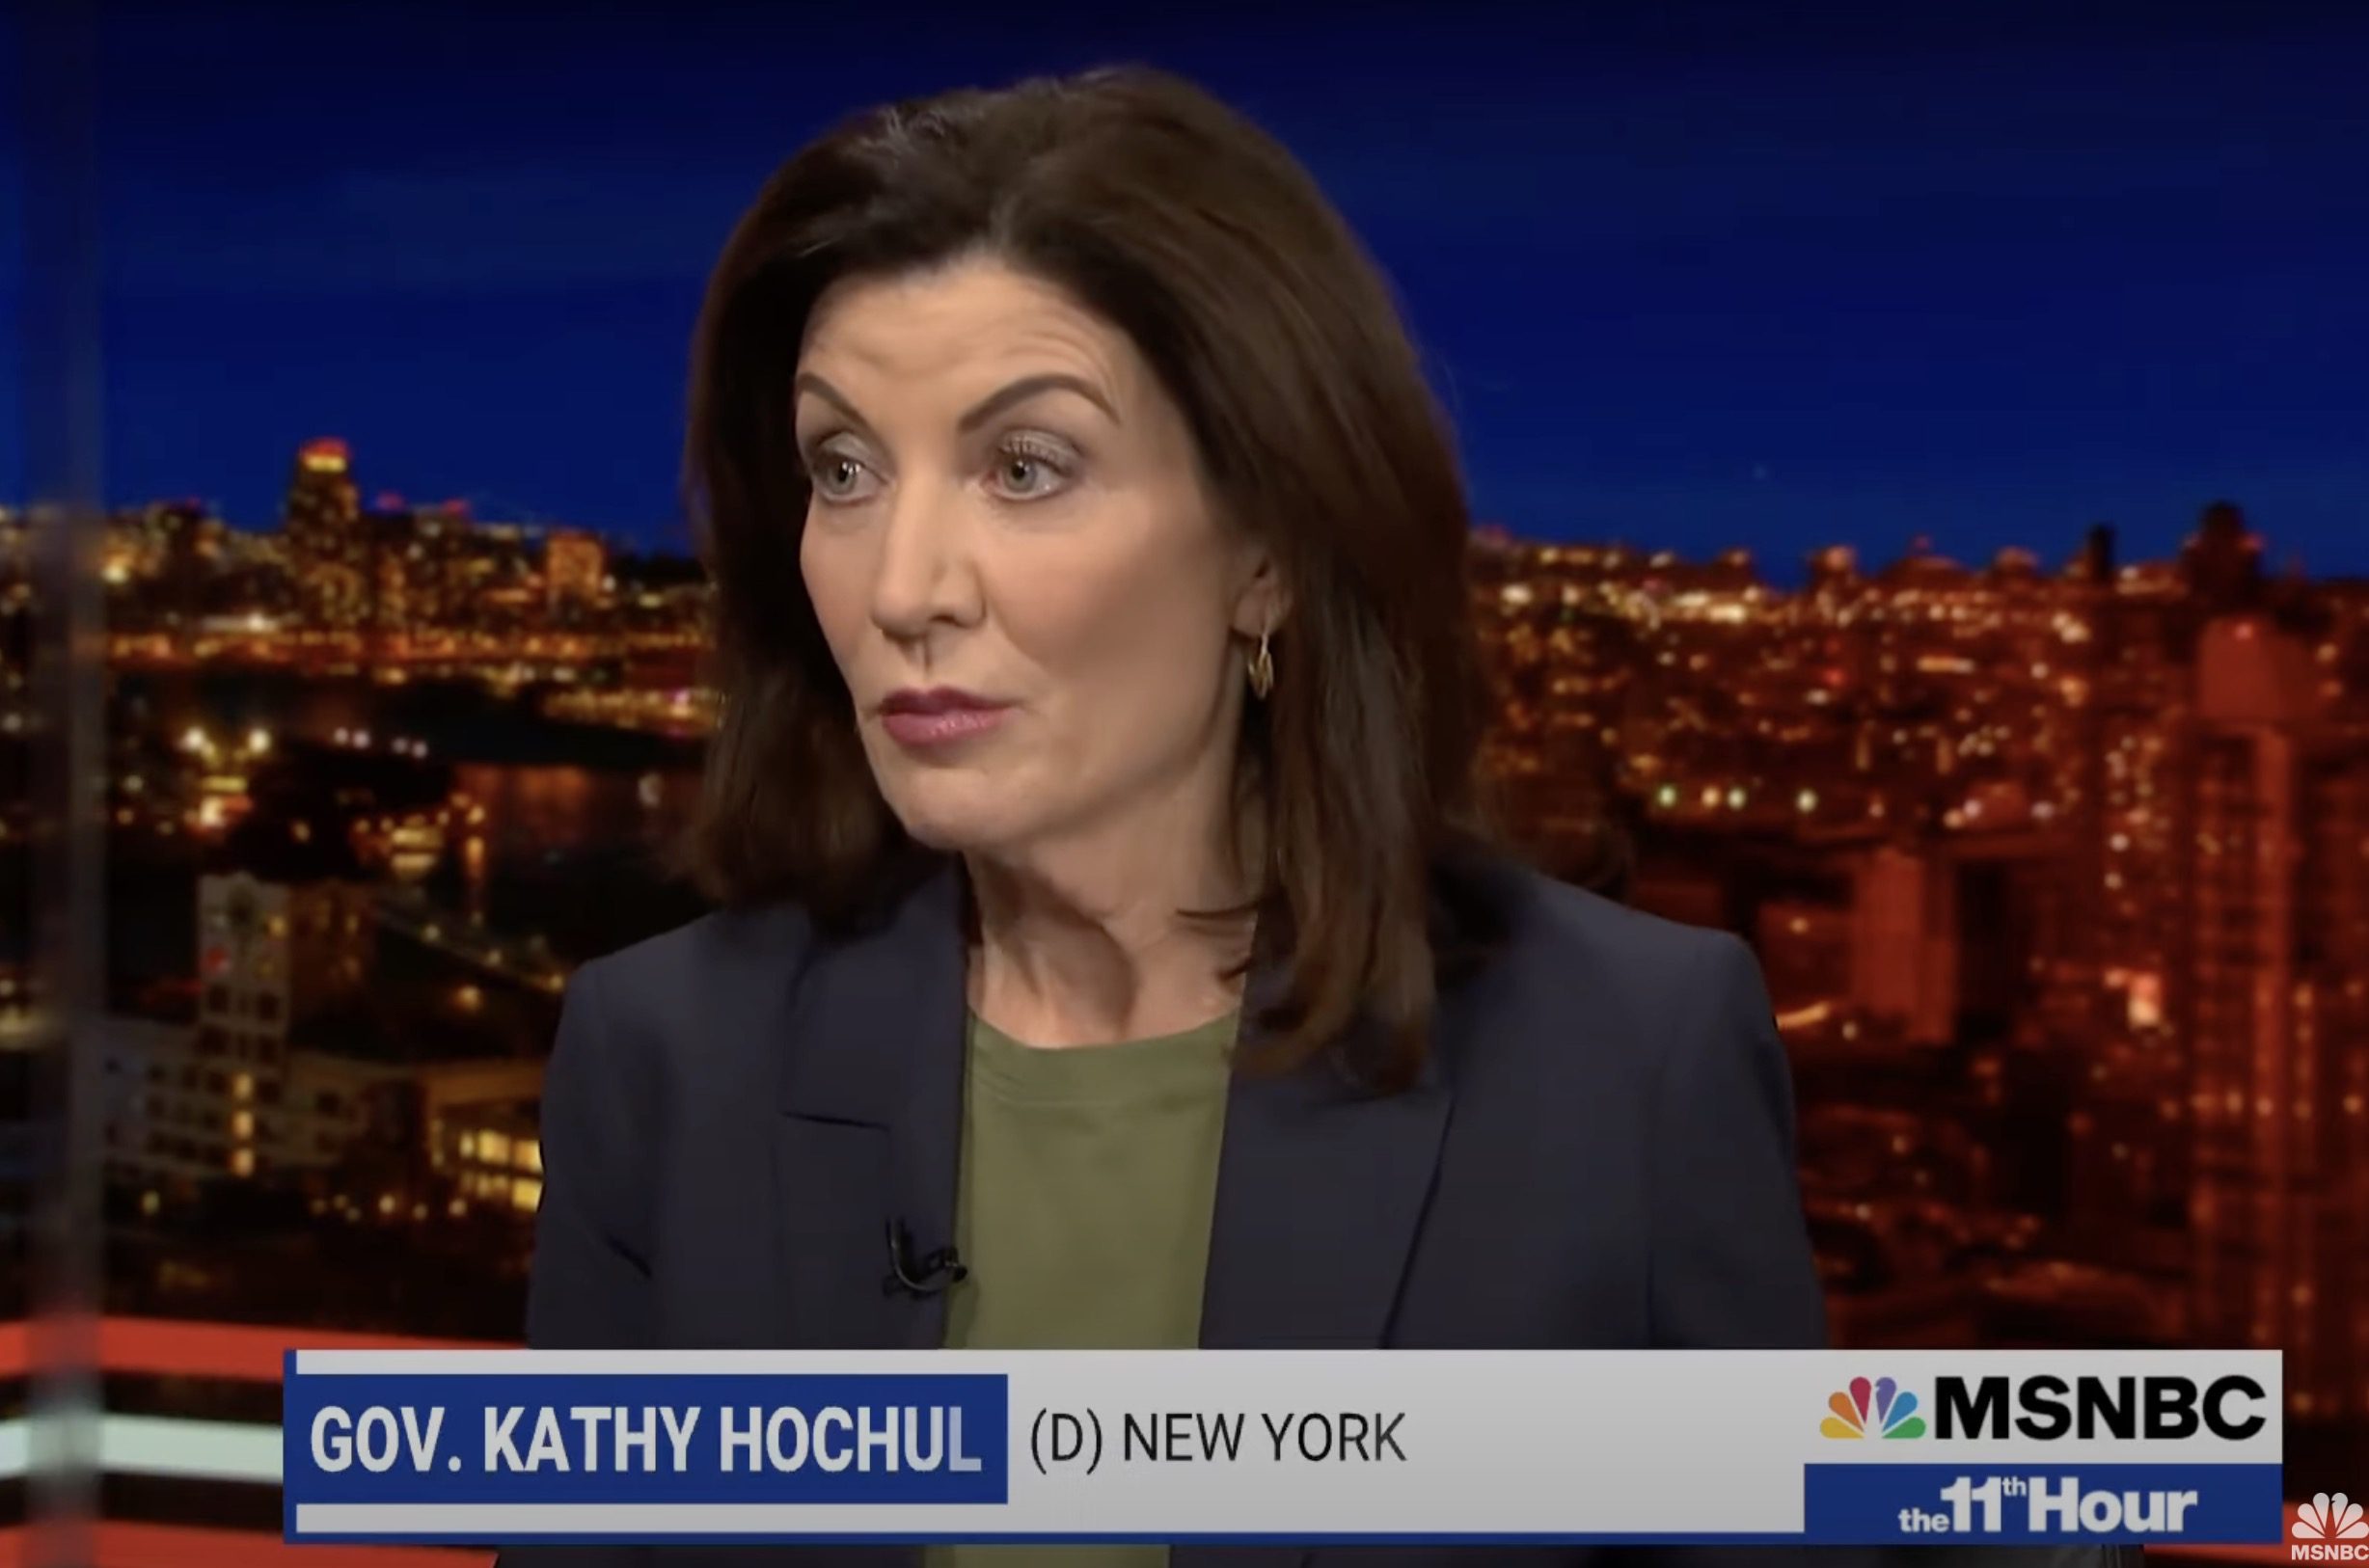 NANNY STATE: New York Governor Kathy Hochul Considering Ban on Sale of ‘ALL’ Tobacco Products